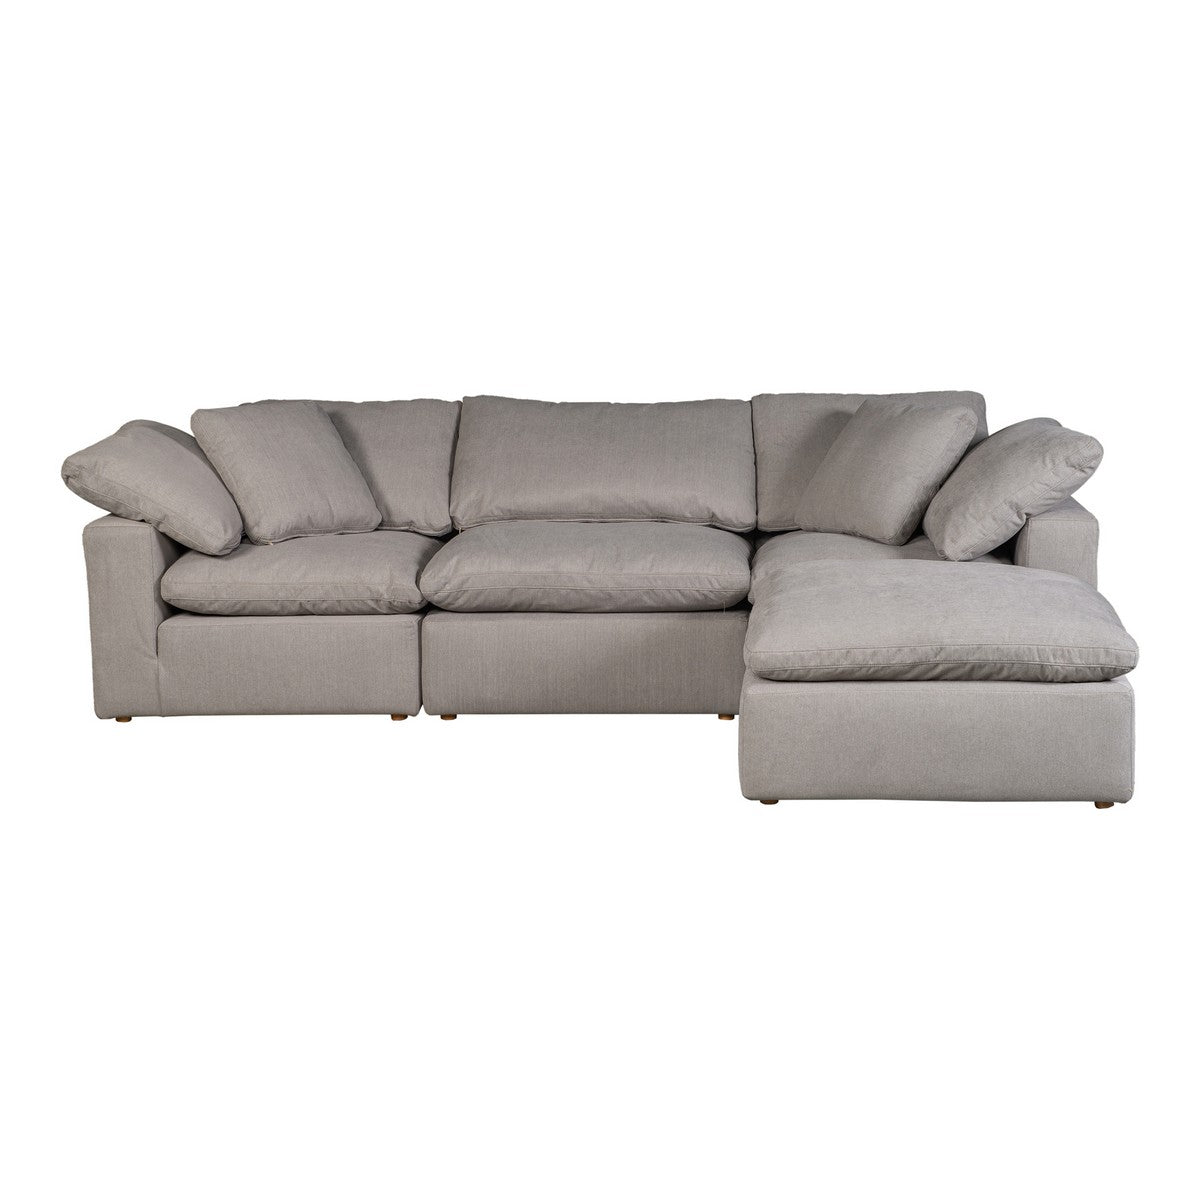 Moe's Home Collection Terra Condo Lounge Modular Sectional Livesmart Fabric Light Grey - YJ-1015-29 - Moe's Home Collection - Extras - Minimal And Modern - 1